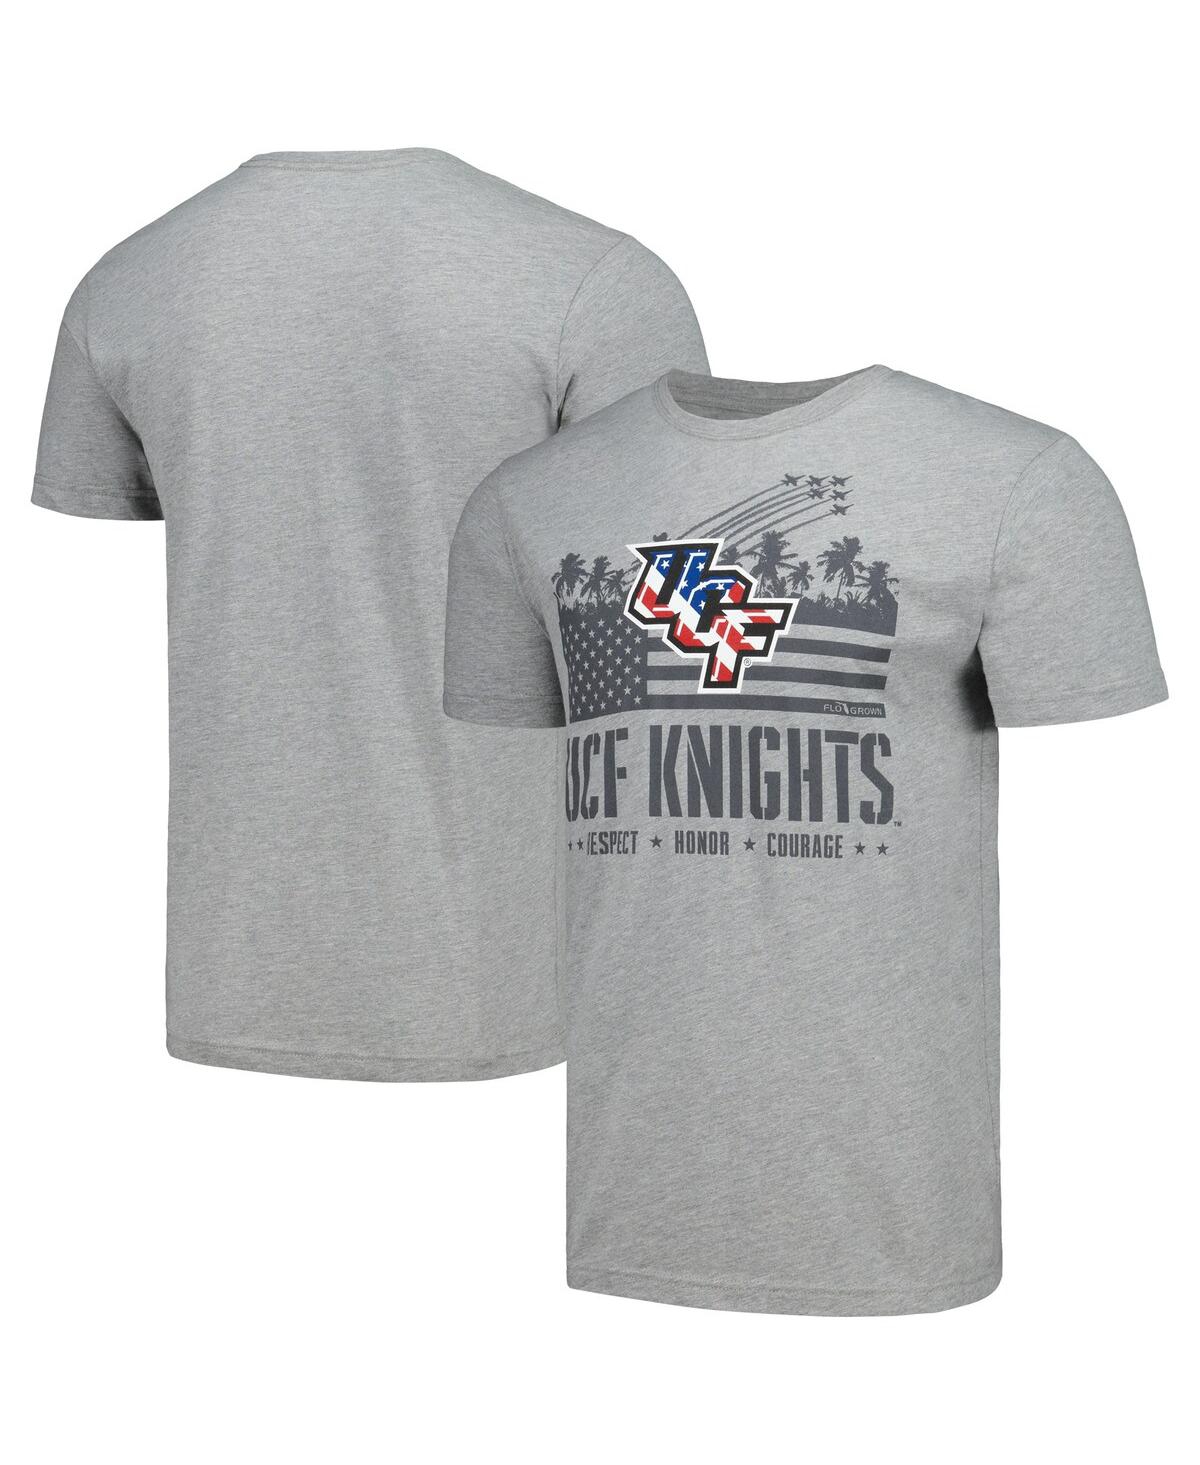 Men's Heather Gray Ucf Knights Fly Over T-shirt - Heather Gray